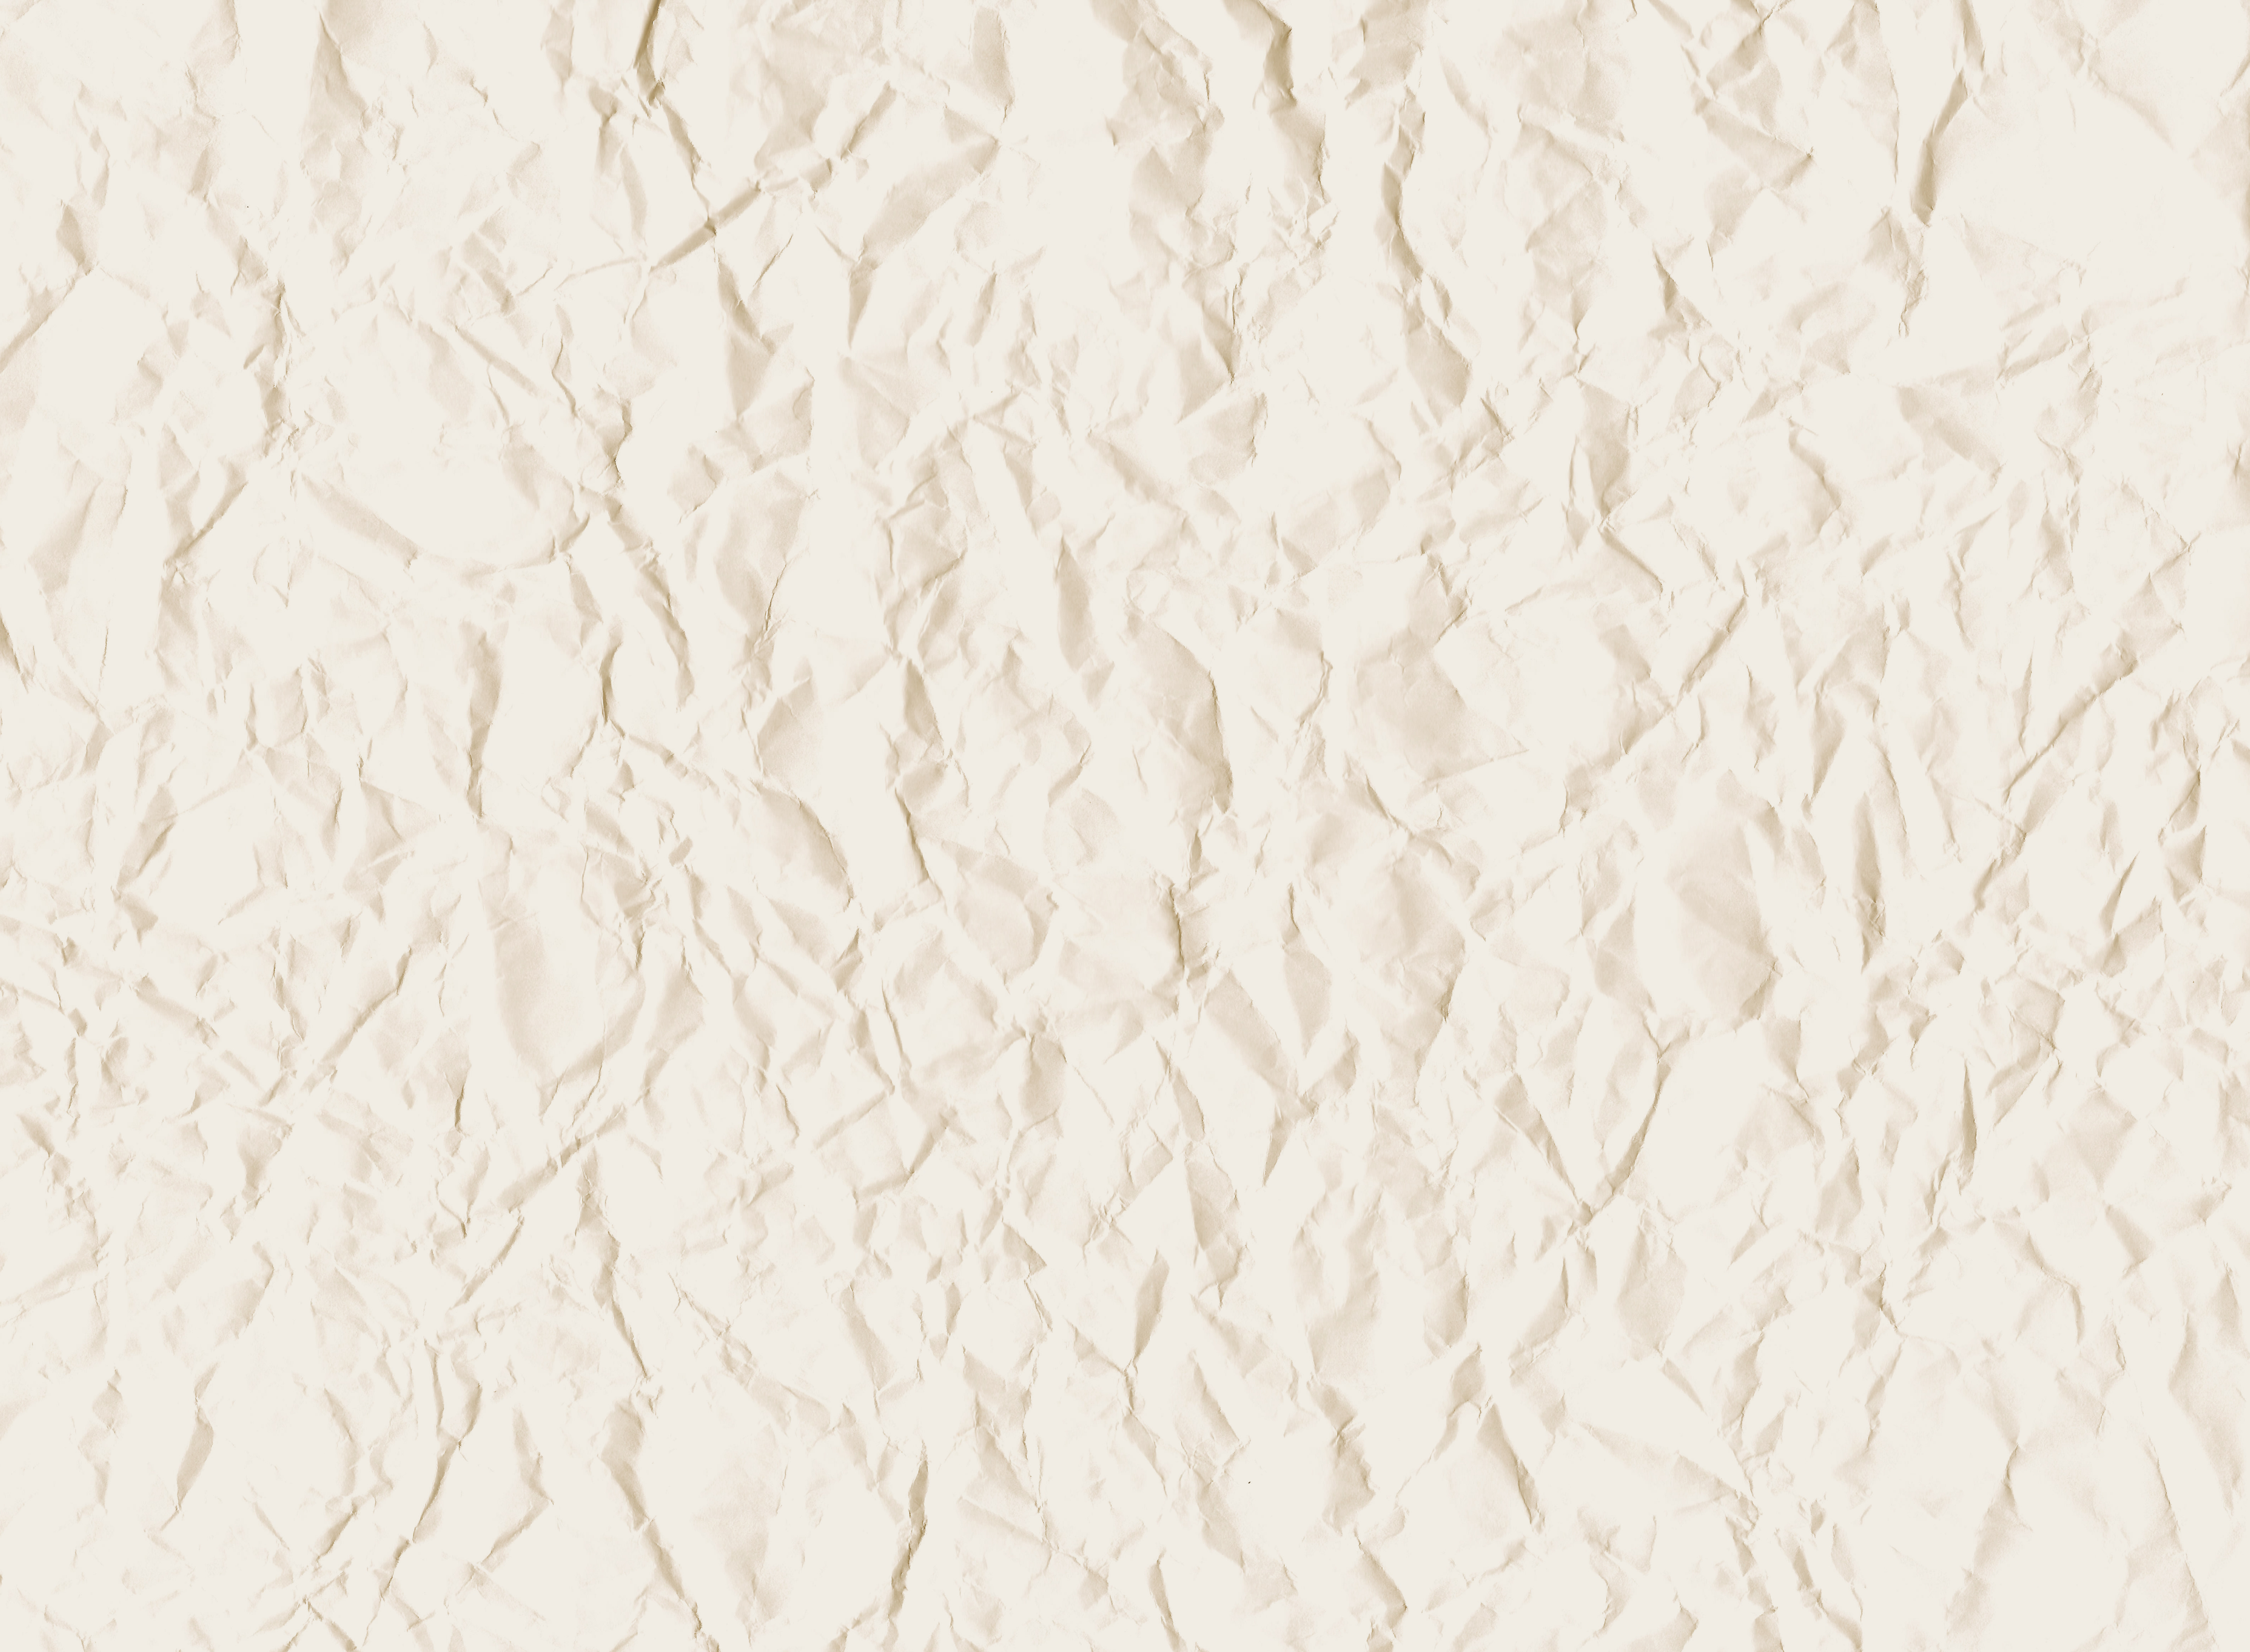 Ivory Off White Wrinkled Paper Texture Picture Free Photograph Photos Public Domain